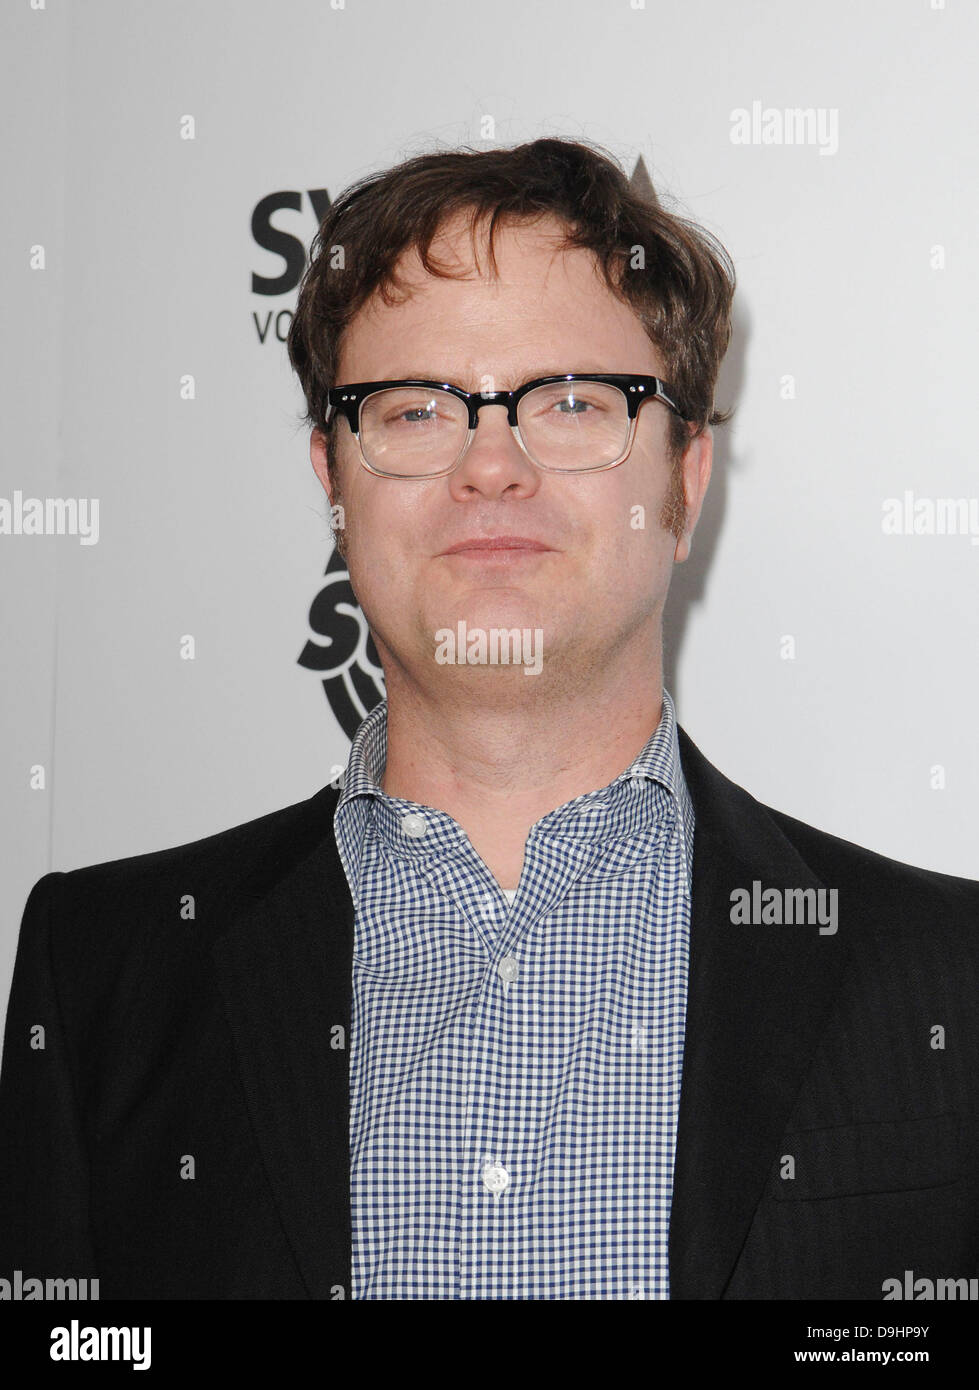 Rainn Wilson  Los Angeles Premiere of 'Super' held at The Egyptian Theatre Hollywood, California - 21.03.11 Stock Photo